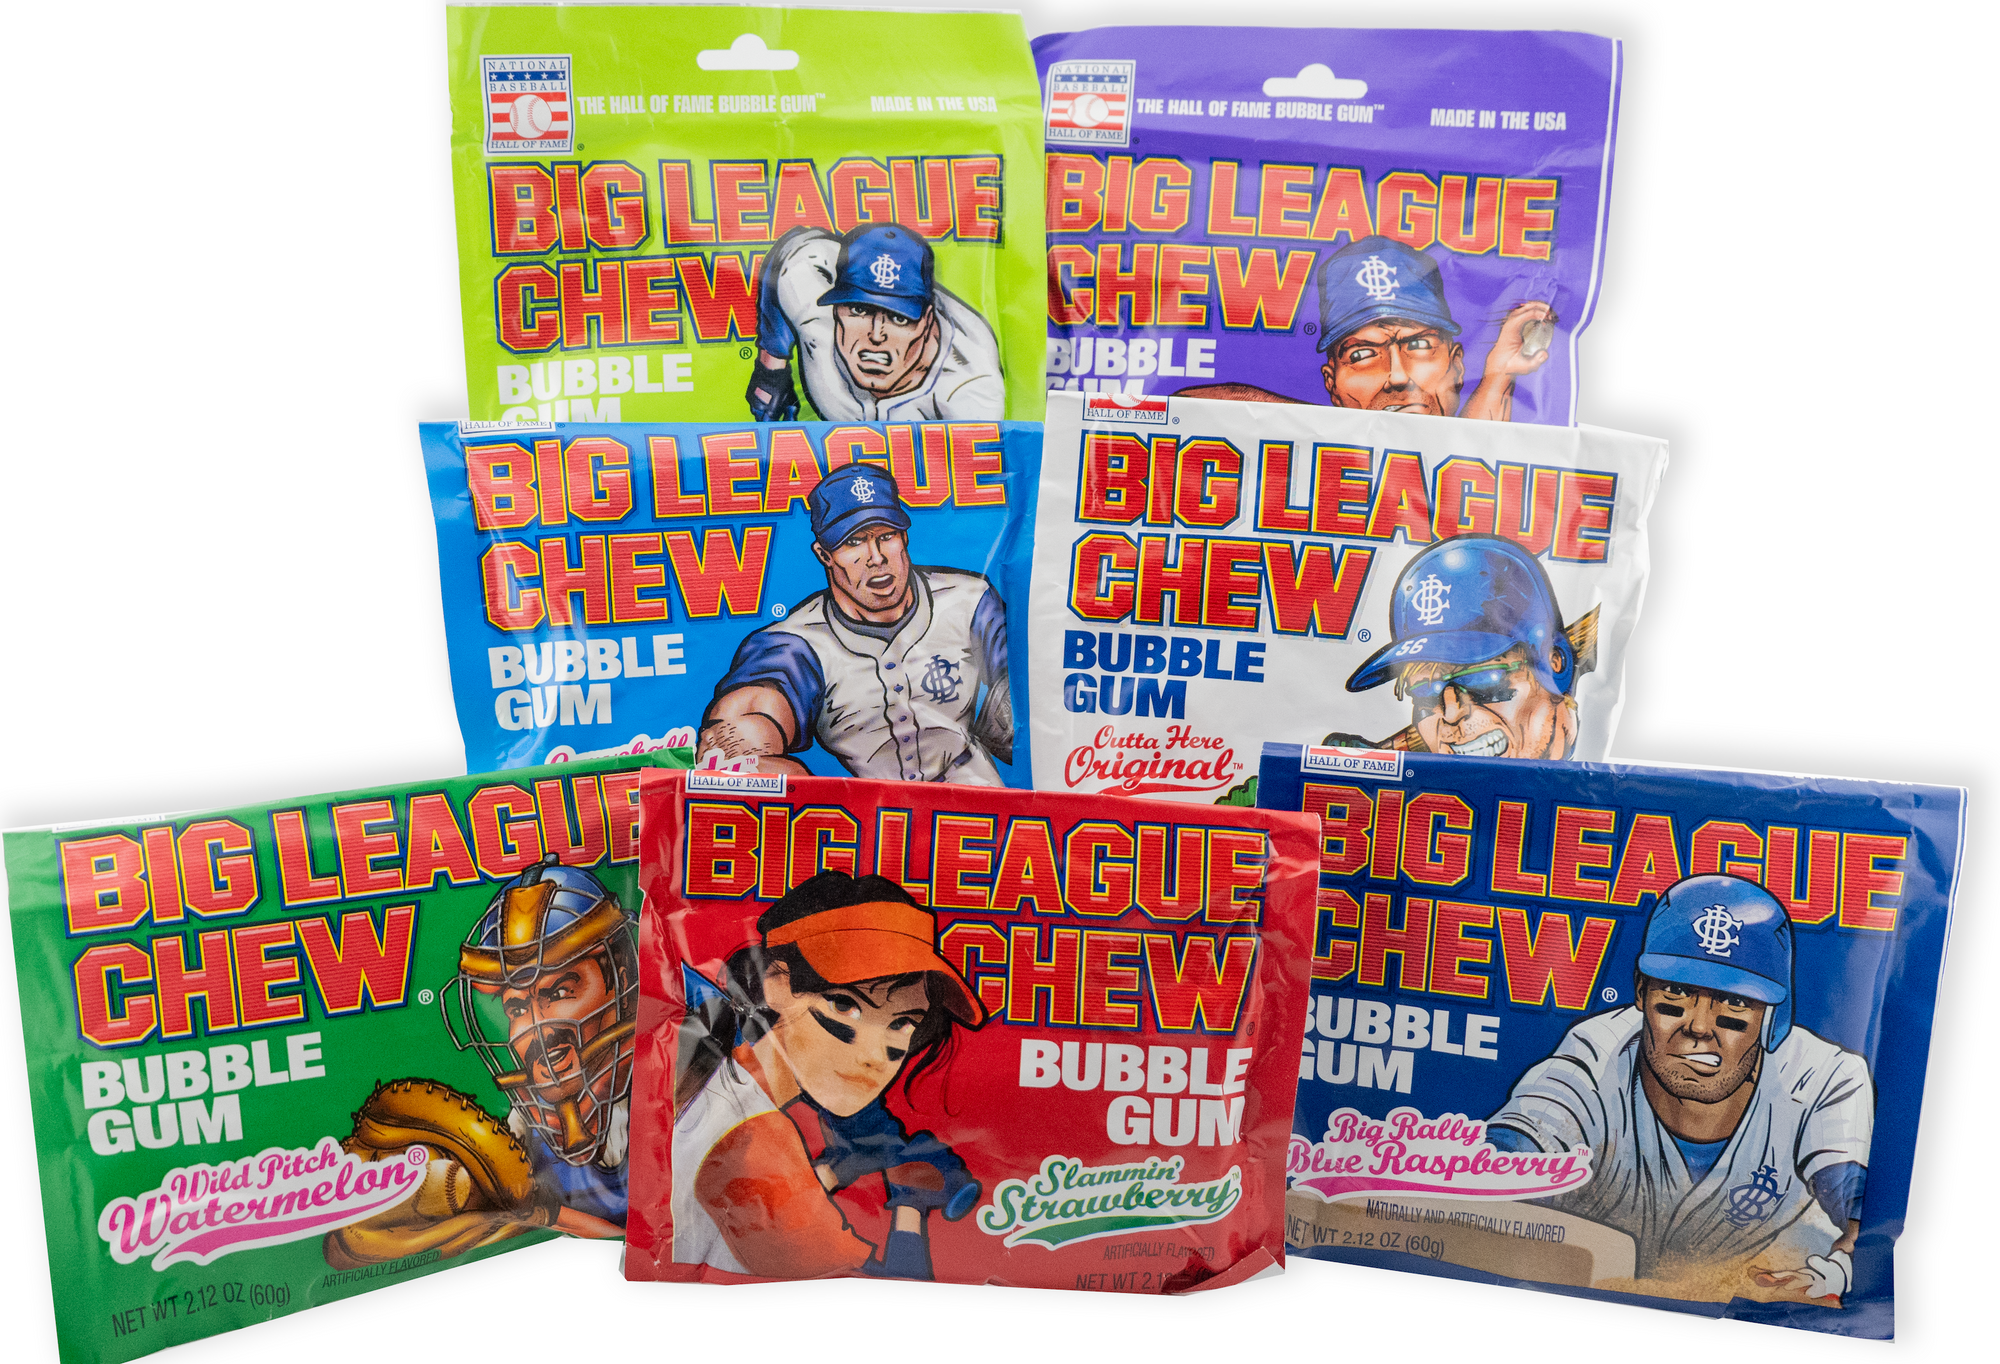 Major League Chewer - Big League Chew Variety 7 Pack